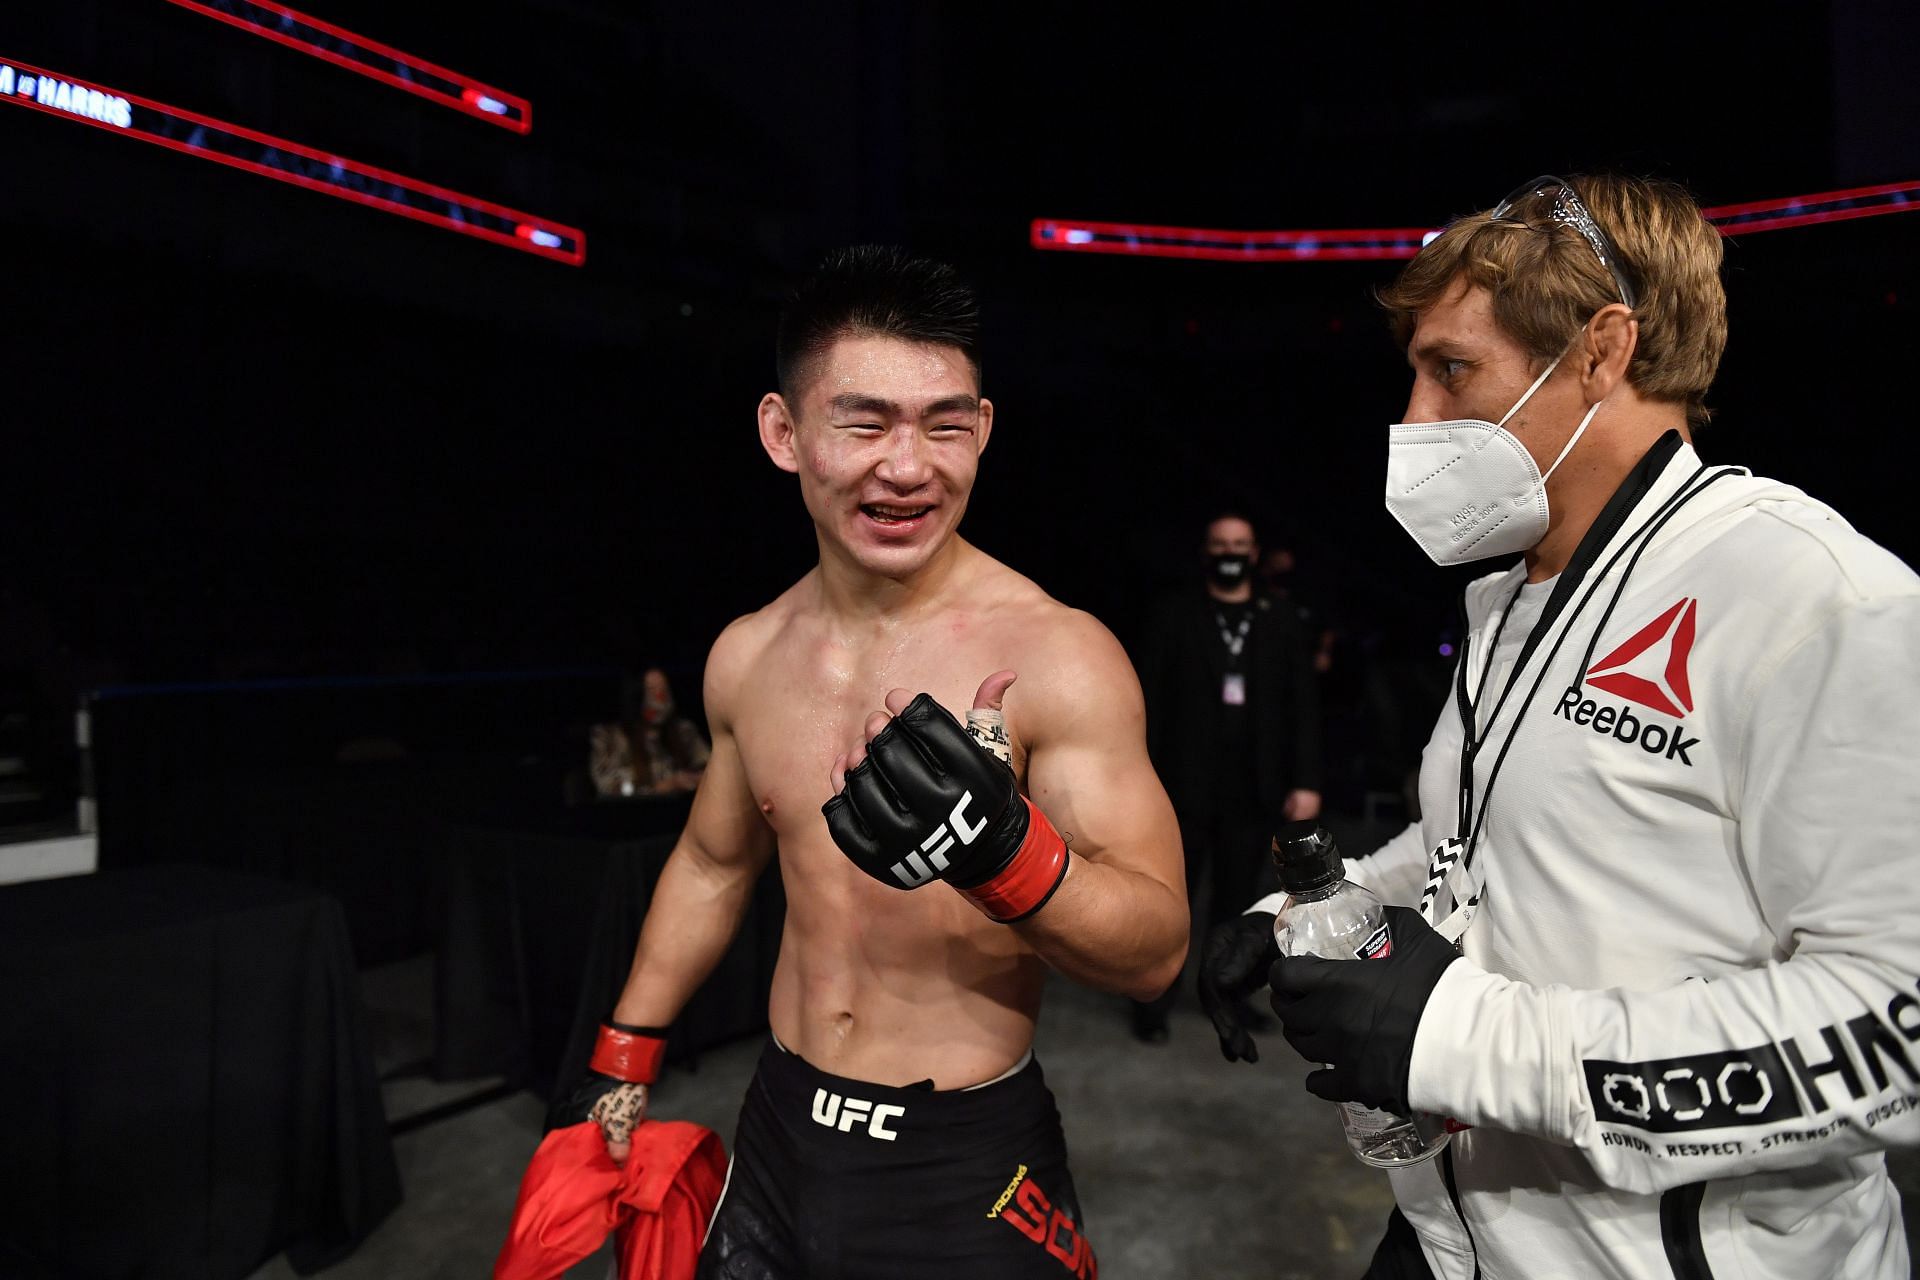 Can Song Yadong end the octagon run of Marlon Moraes this weekend?